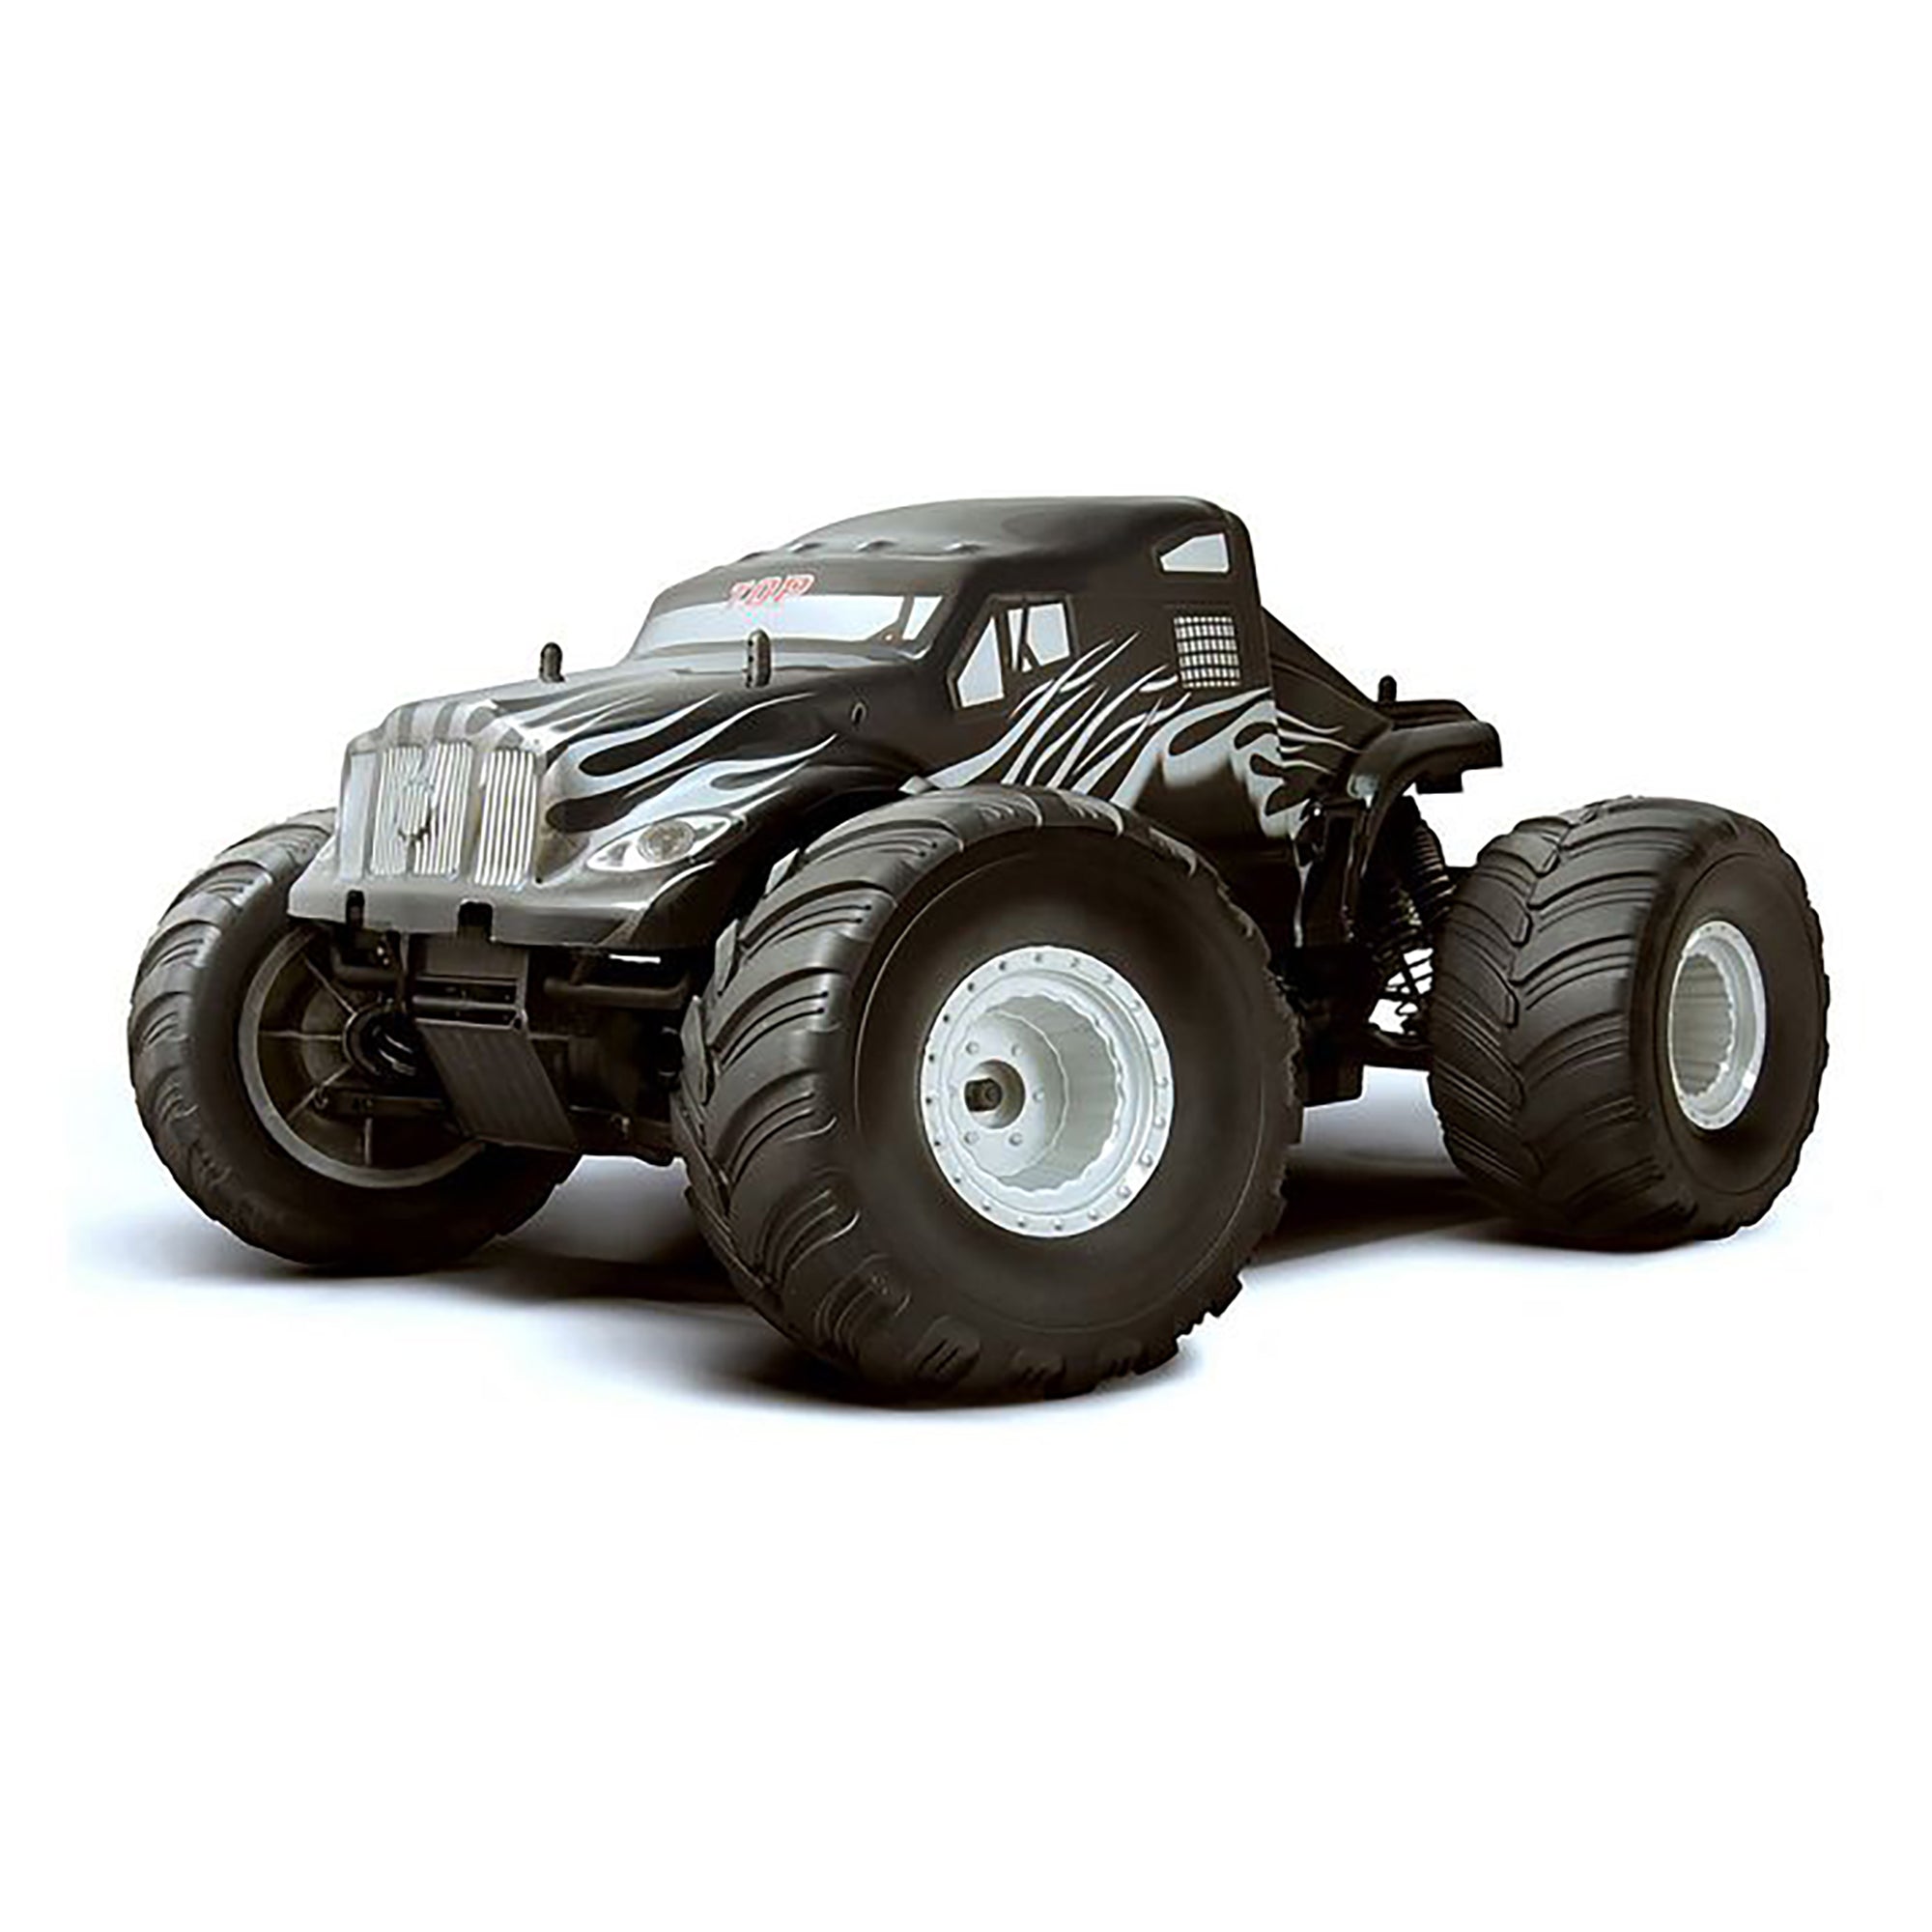 HSP Racing TOP Monster Truck Silver Flame 2.4GHz 1/10 Brushless 4WD Off Road RTR RC Truck